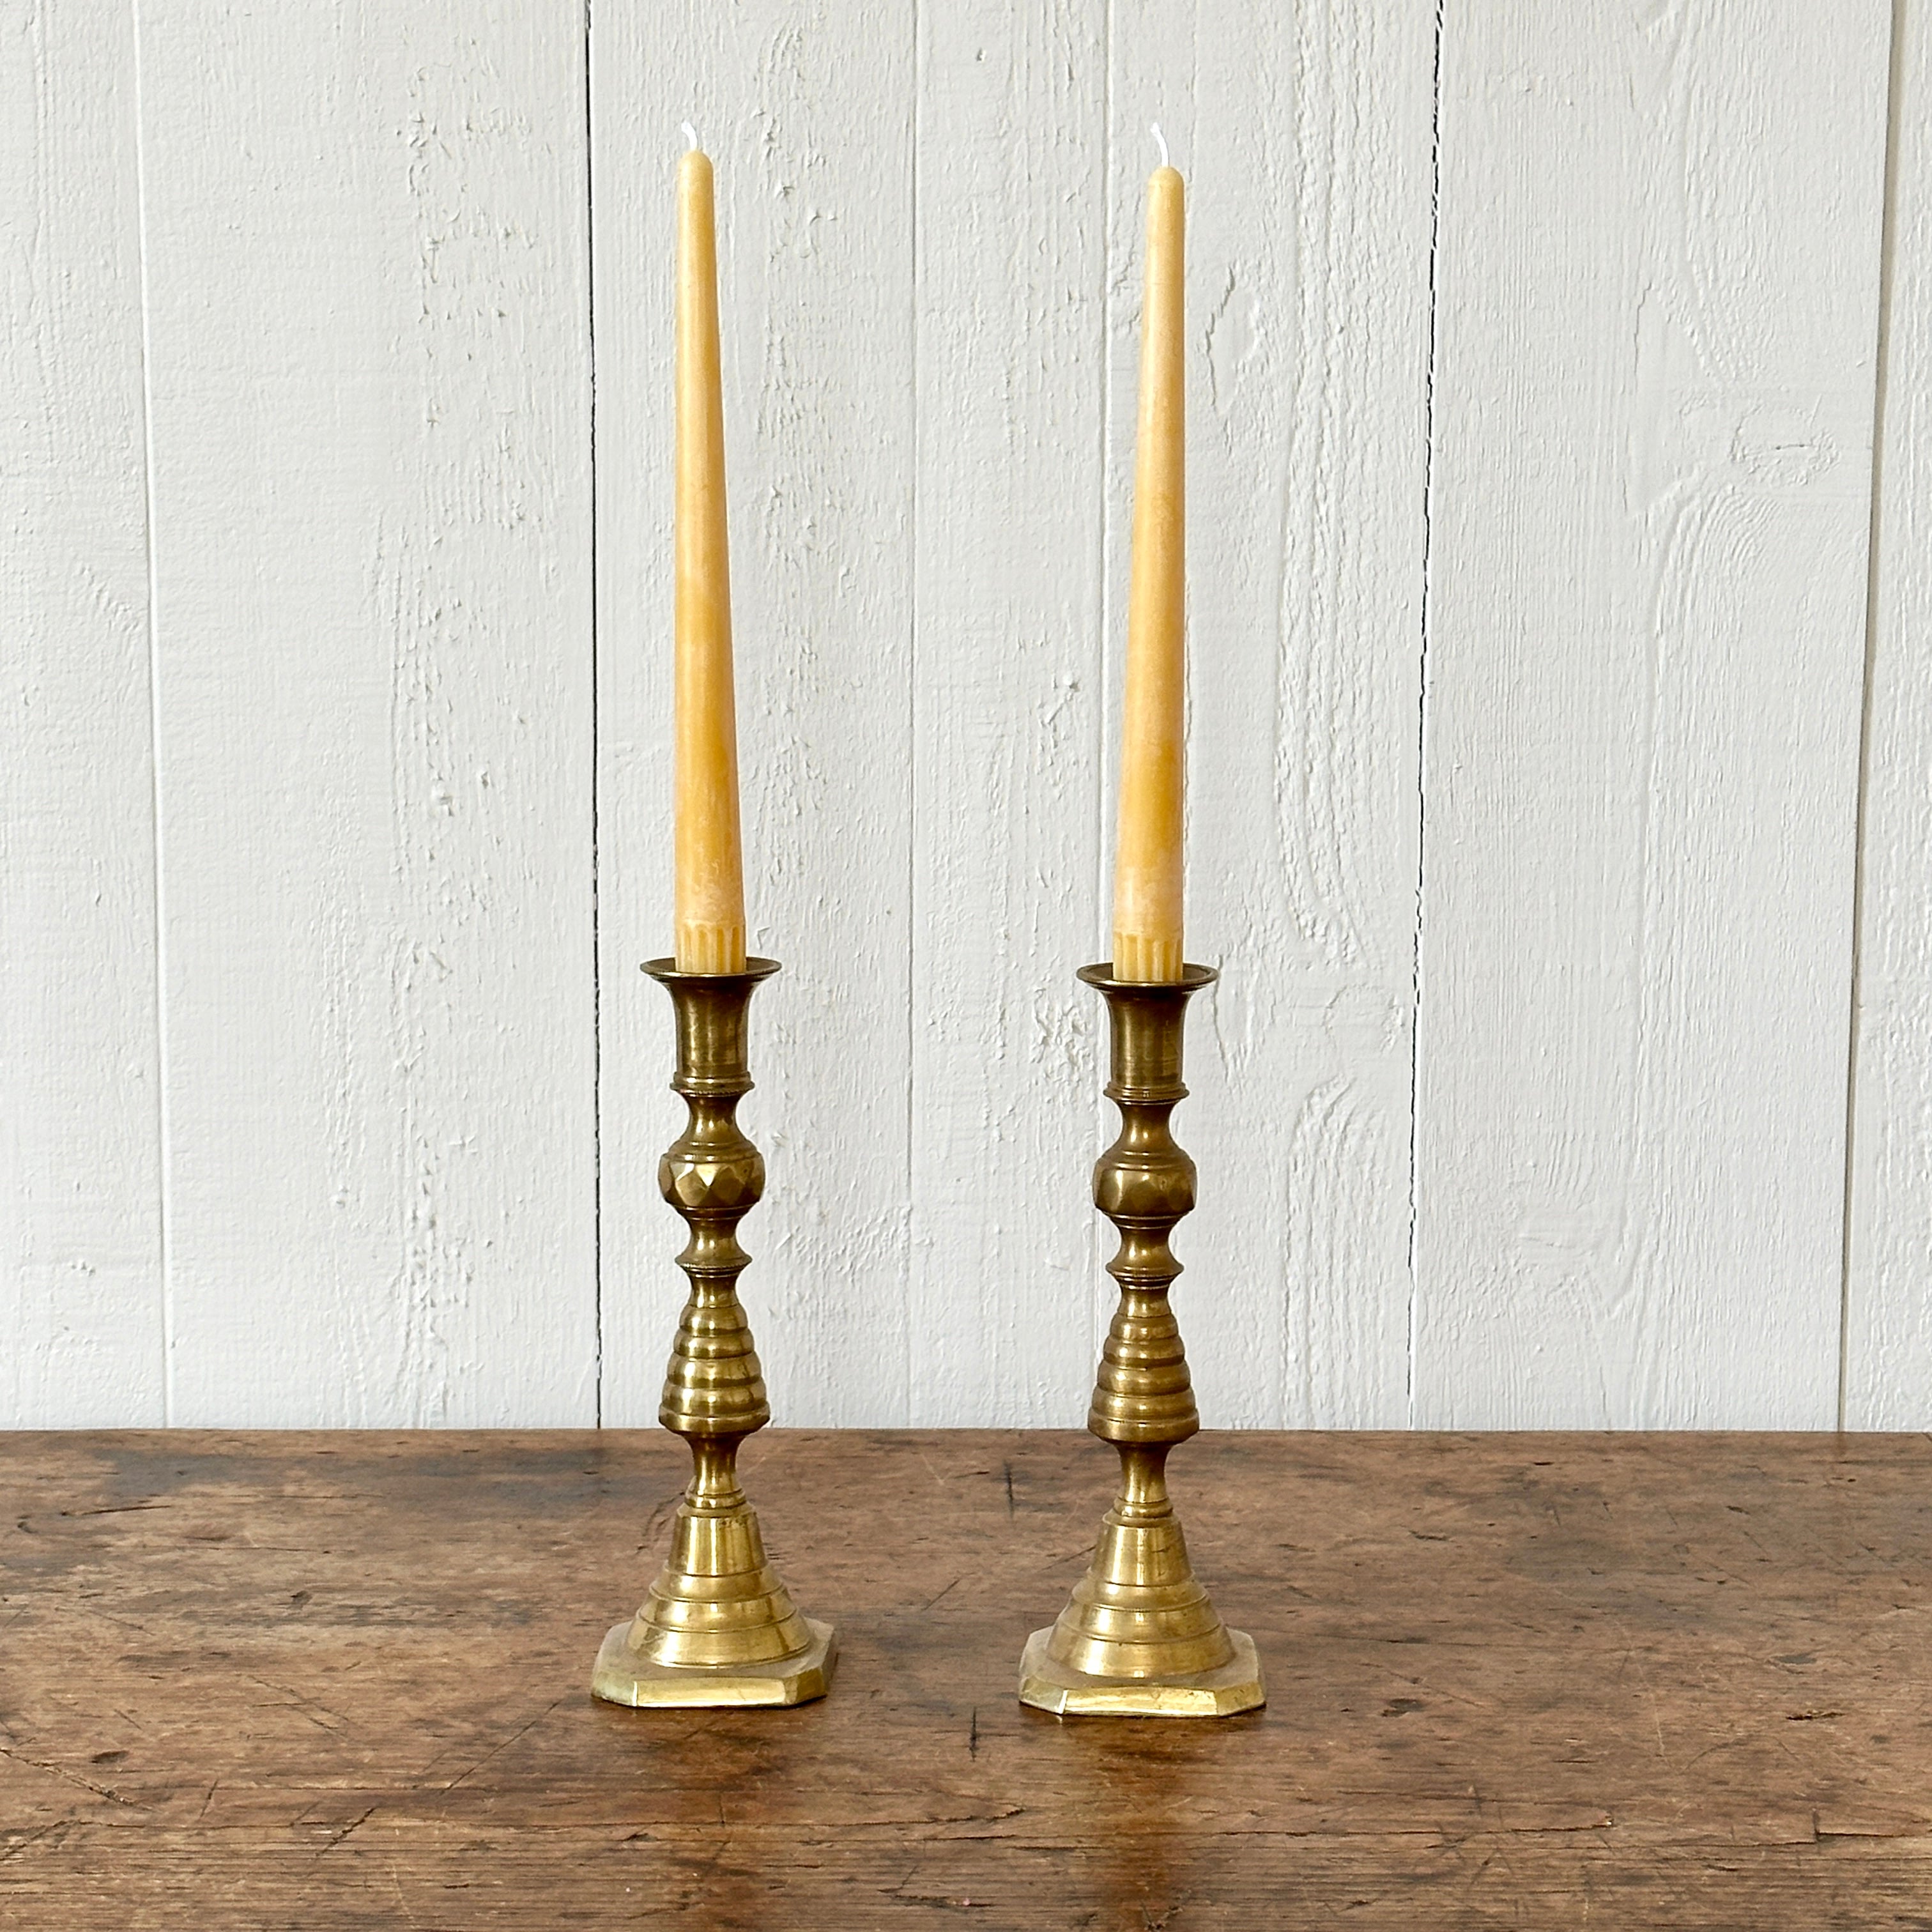 Vintage Classic Brass Bee Hive Candlestick Lamp